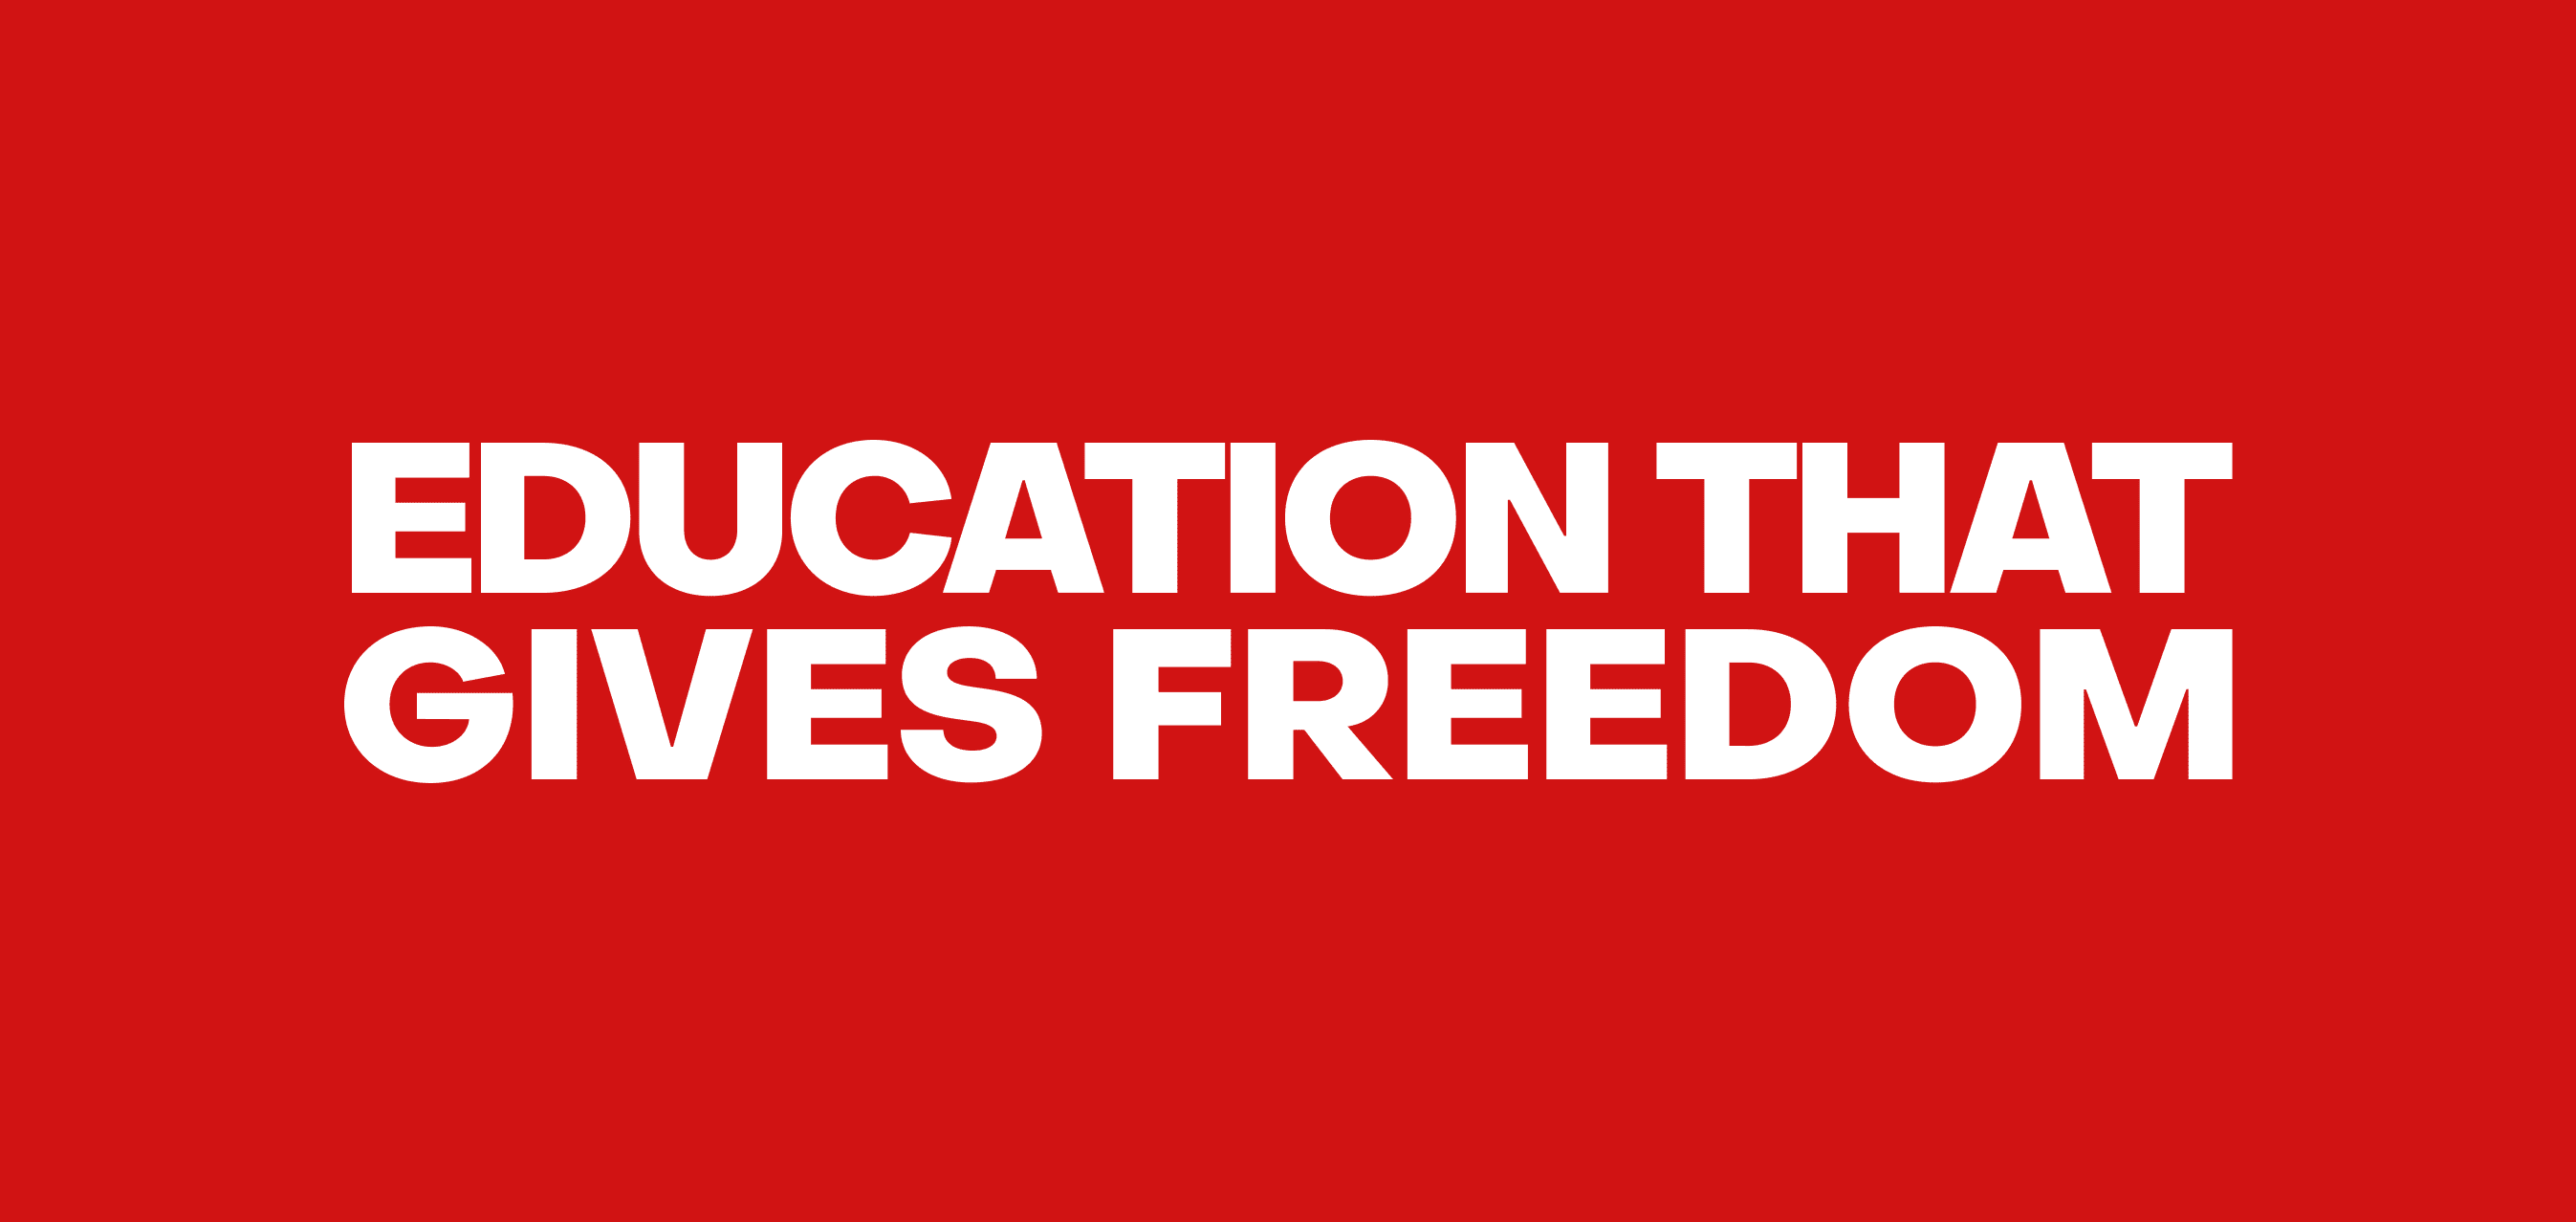 Education that gives freedom